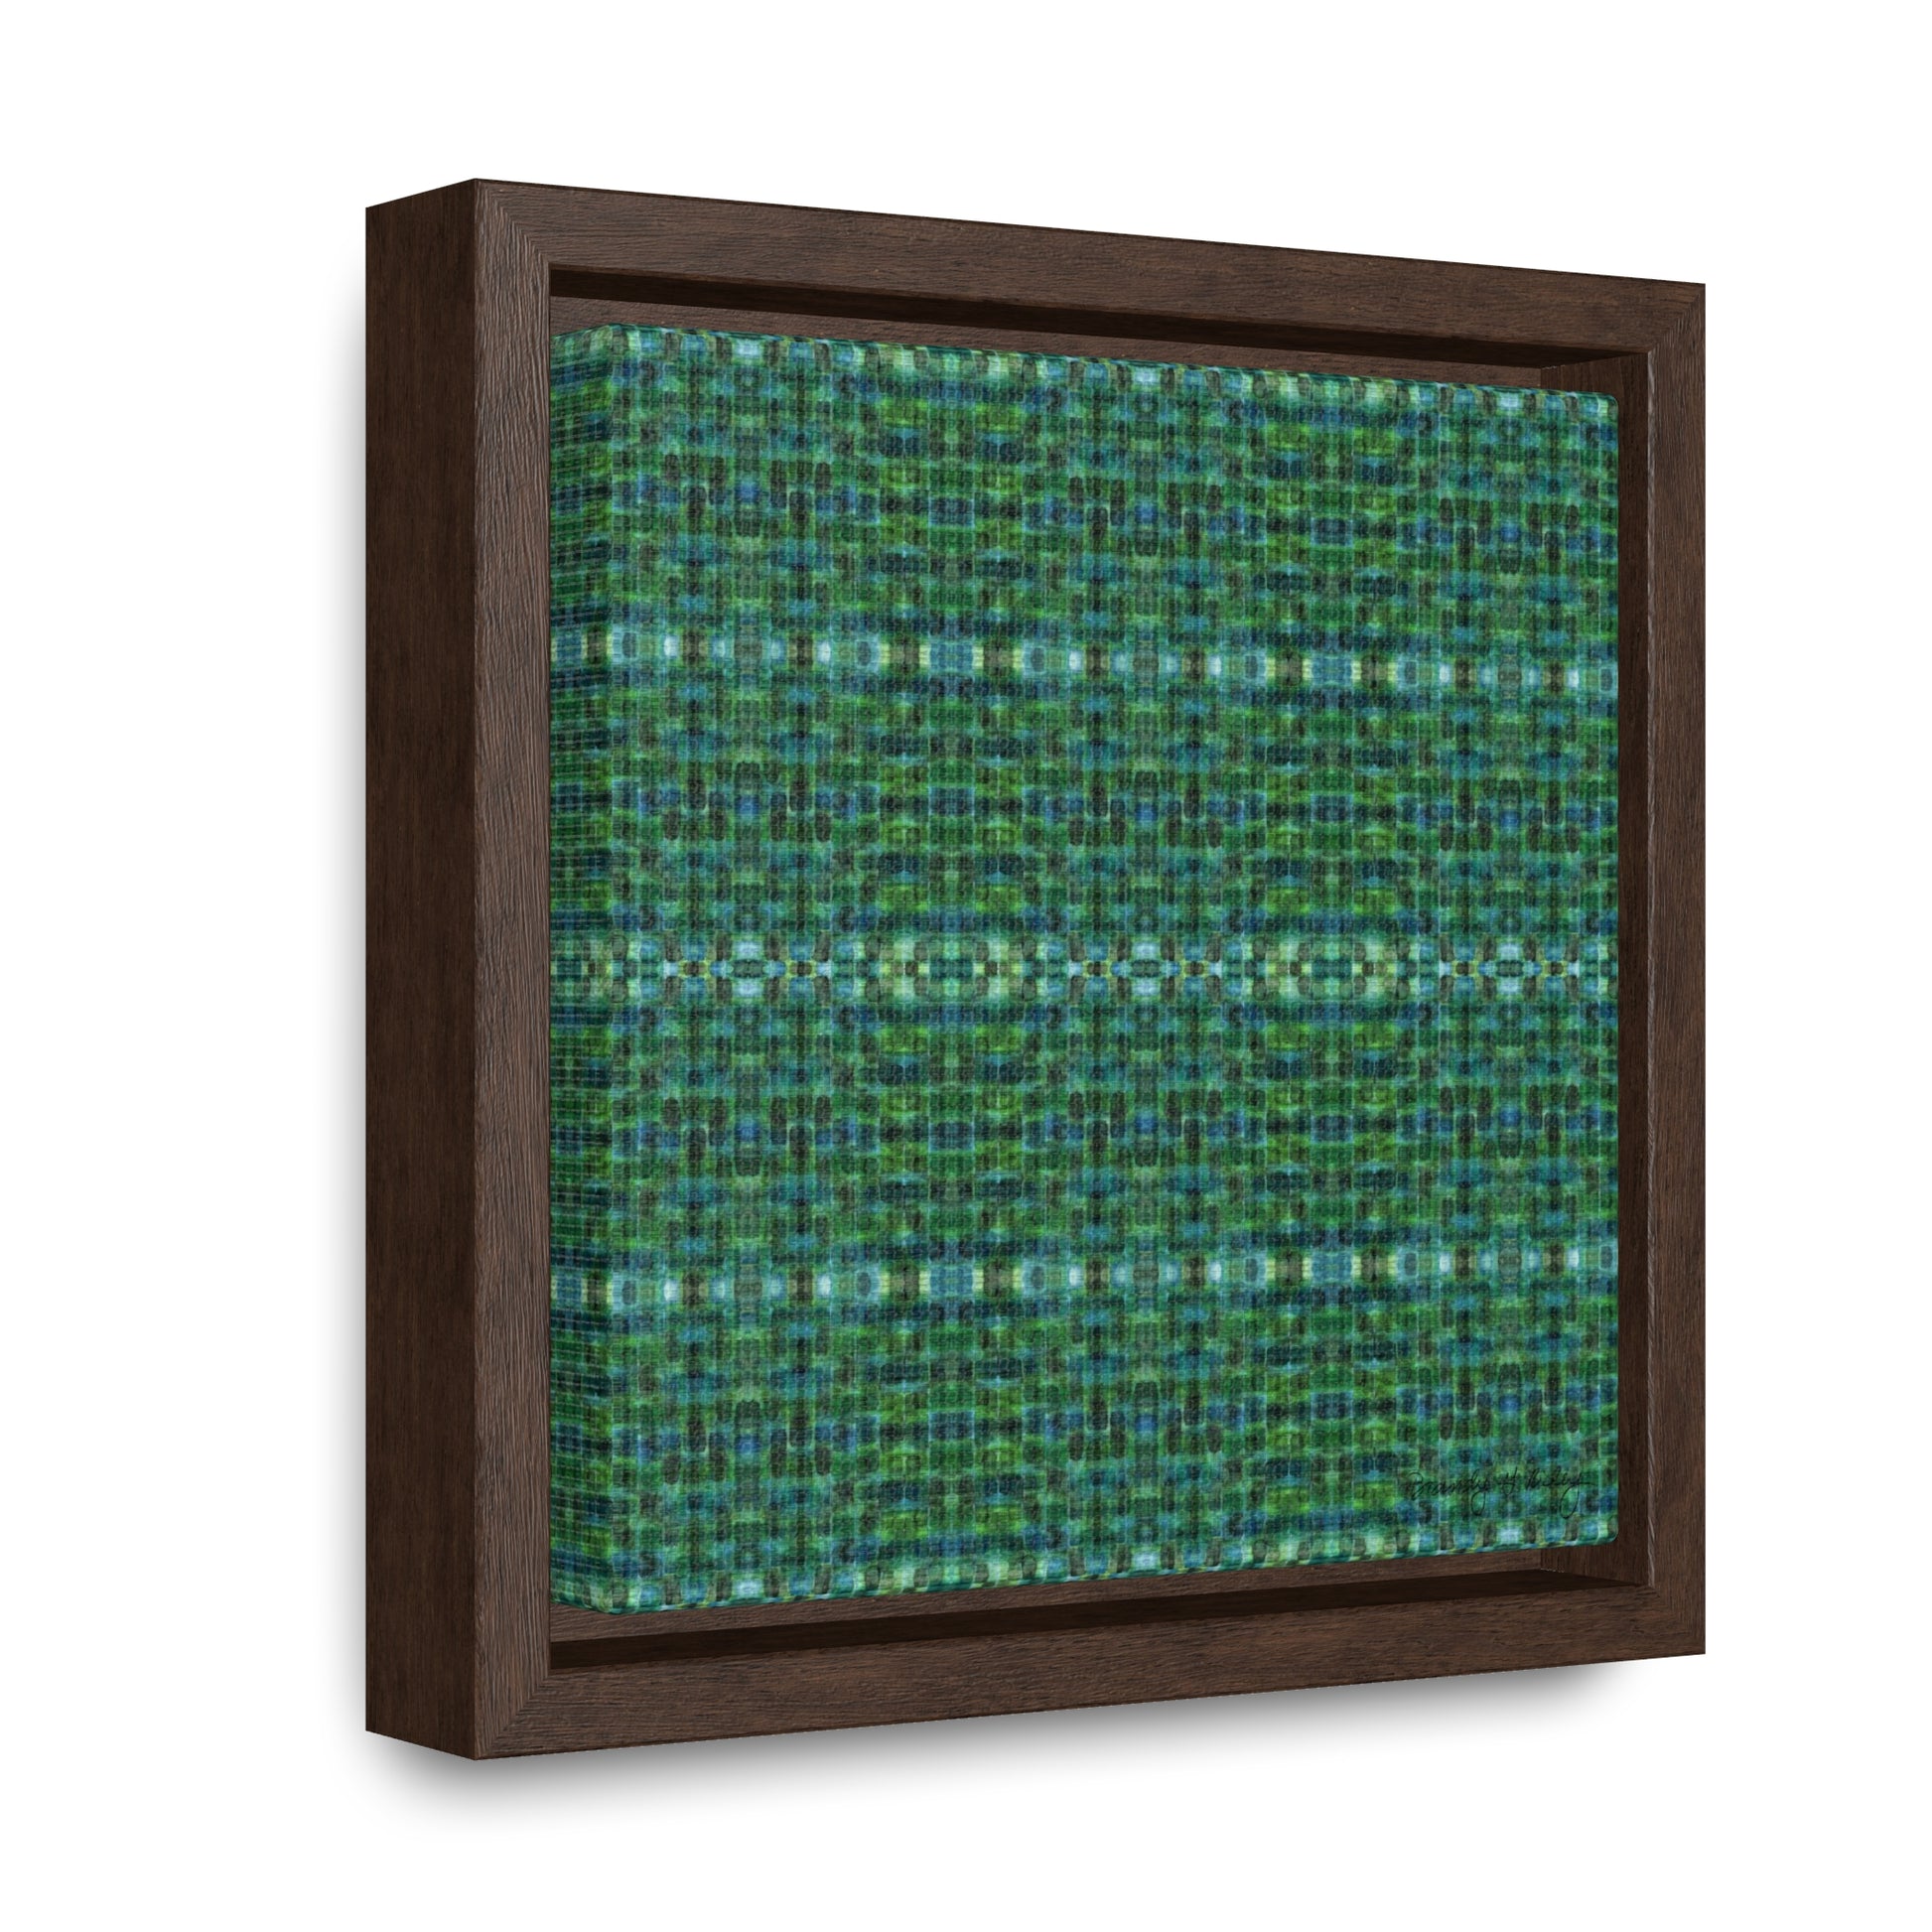 Framed mini canvas featuring an abstract green plaid pattern